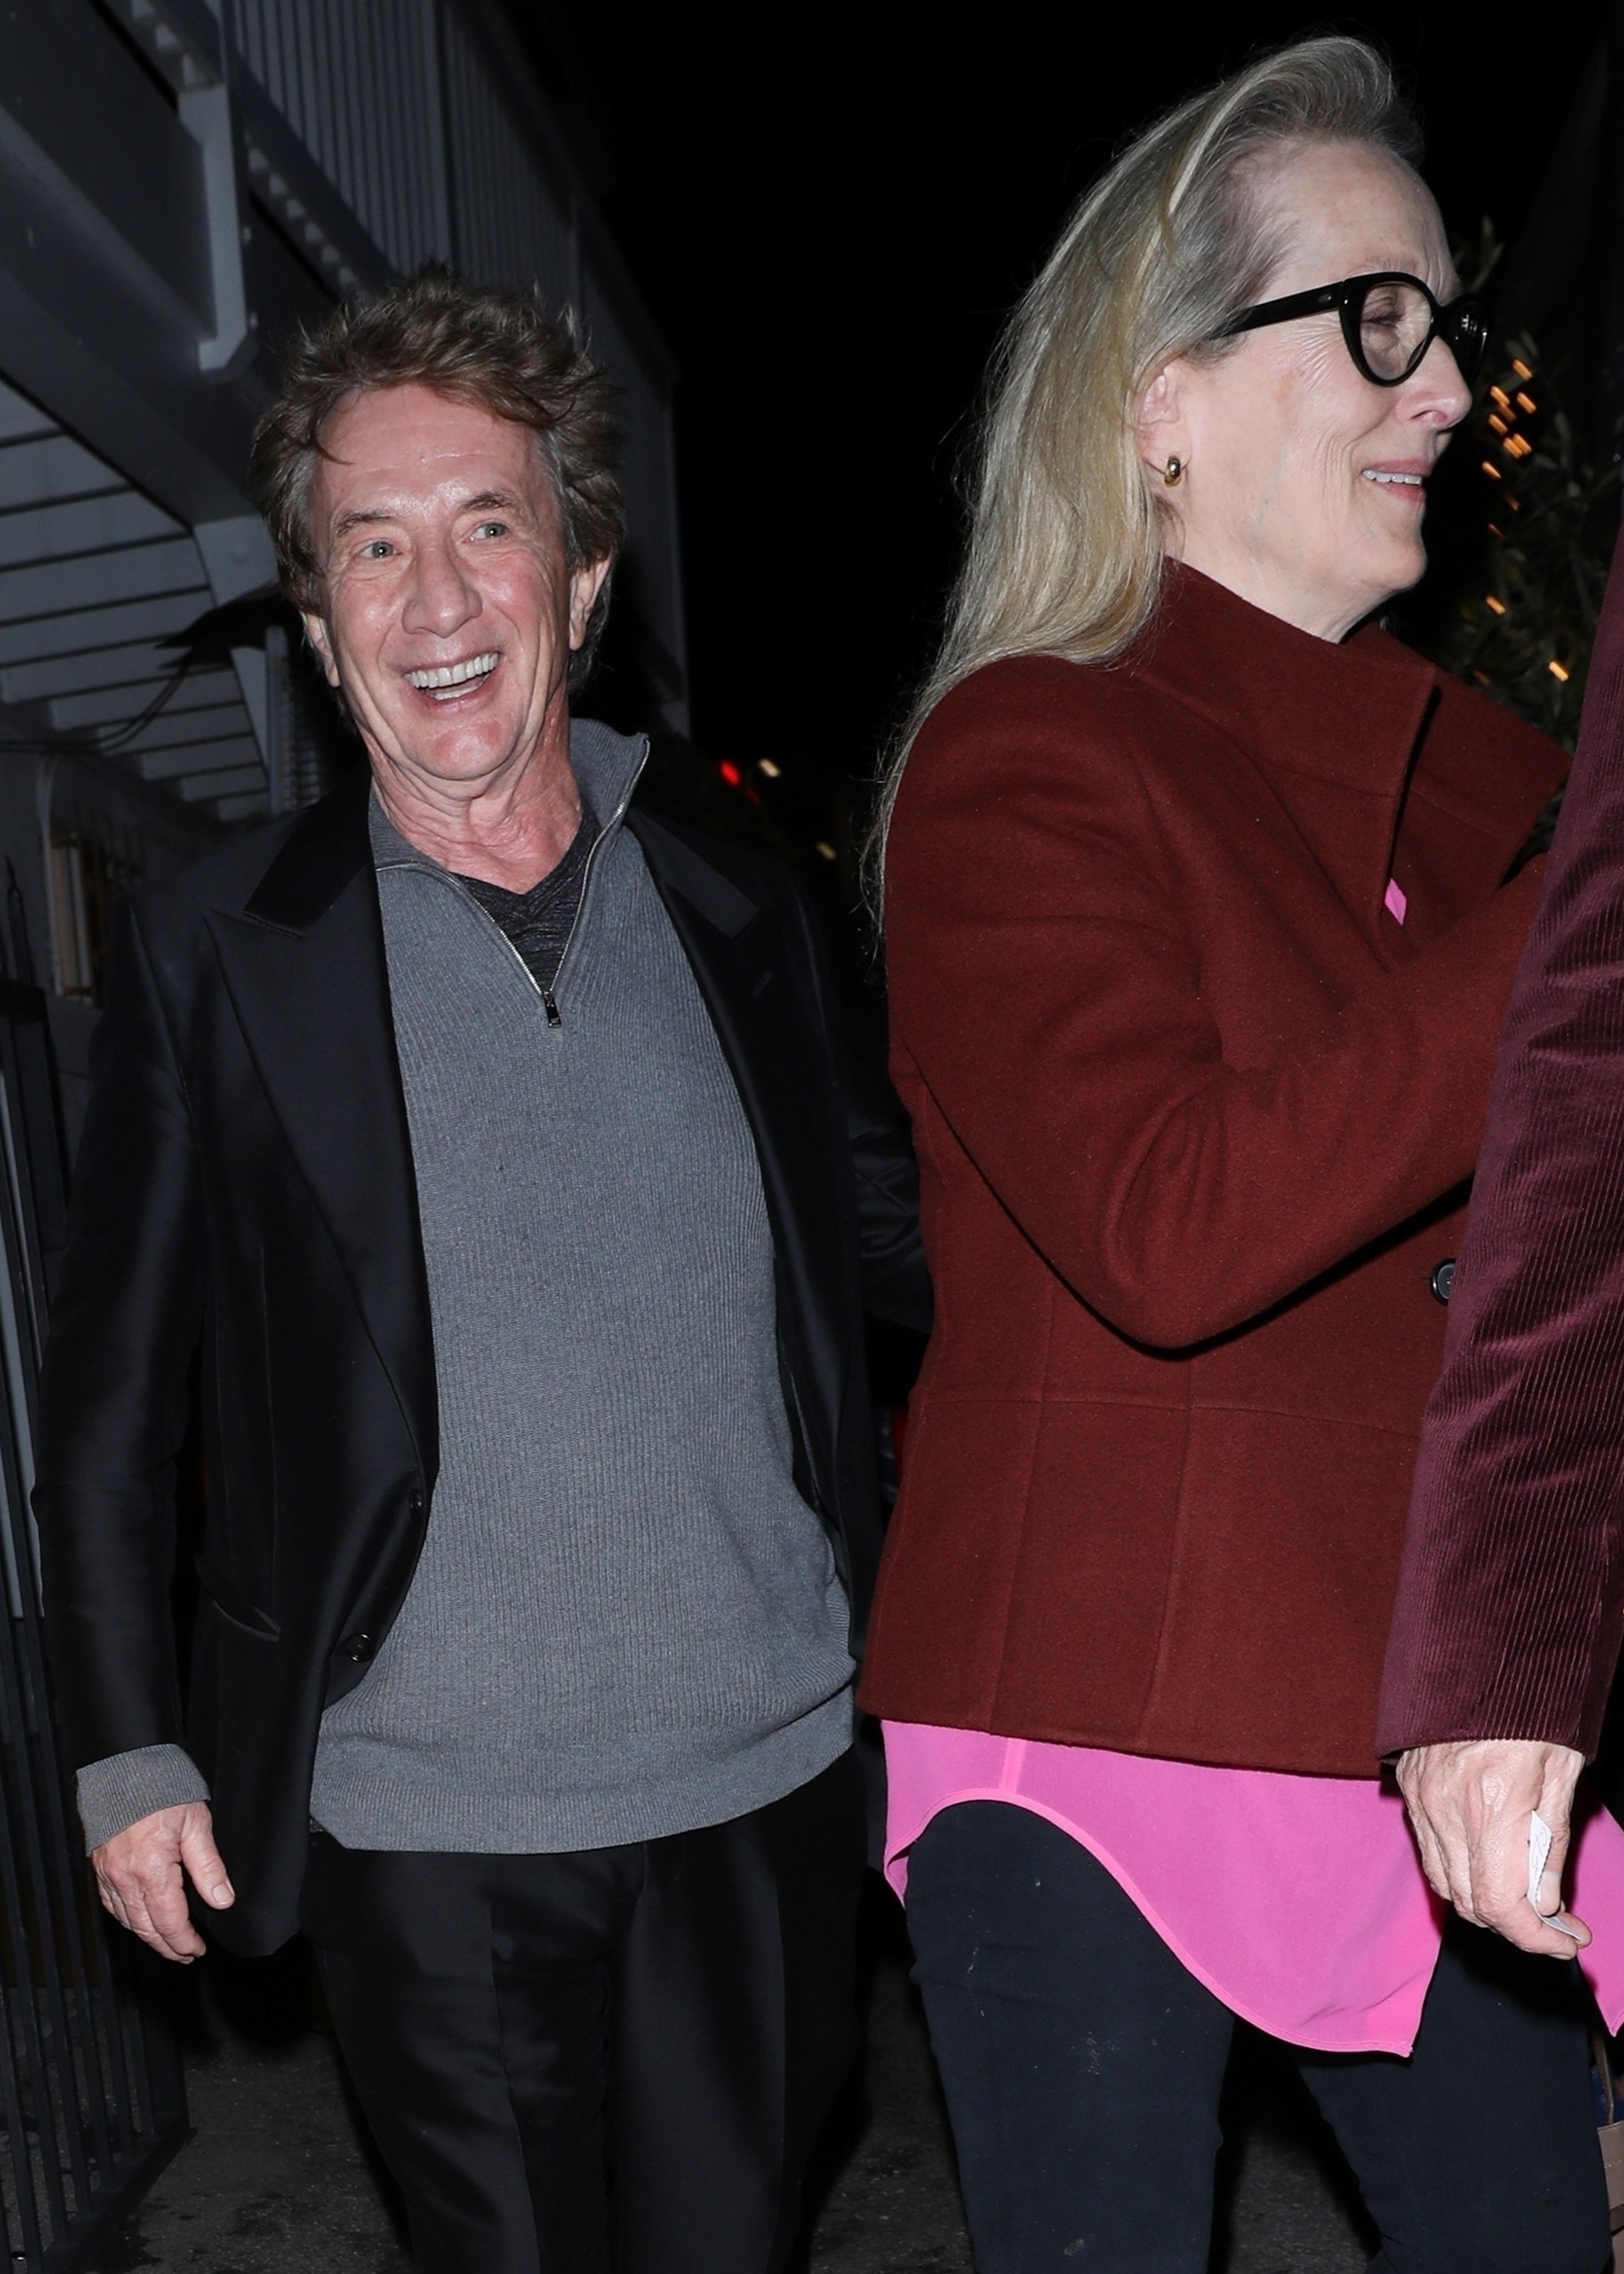 Two individuals walking side by side, one in a black leather jacket, the other in a red cardigan